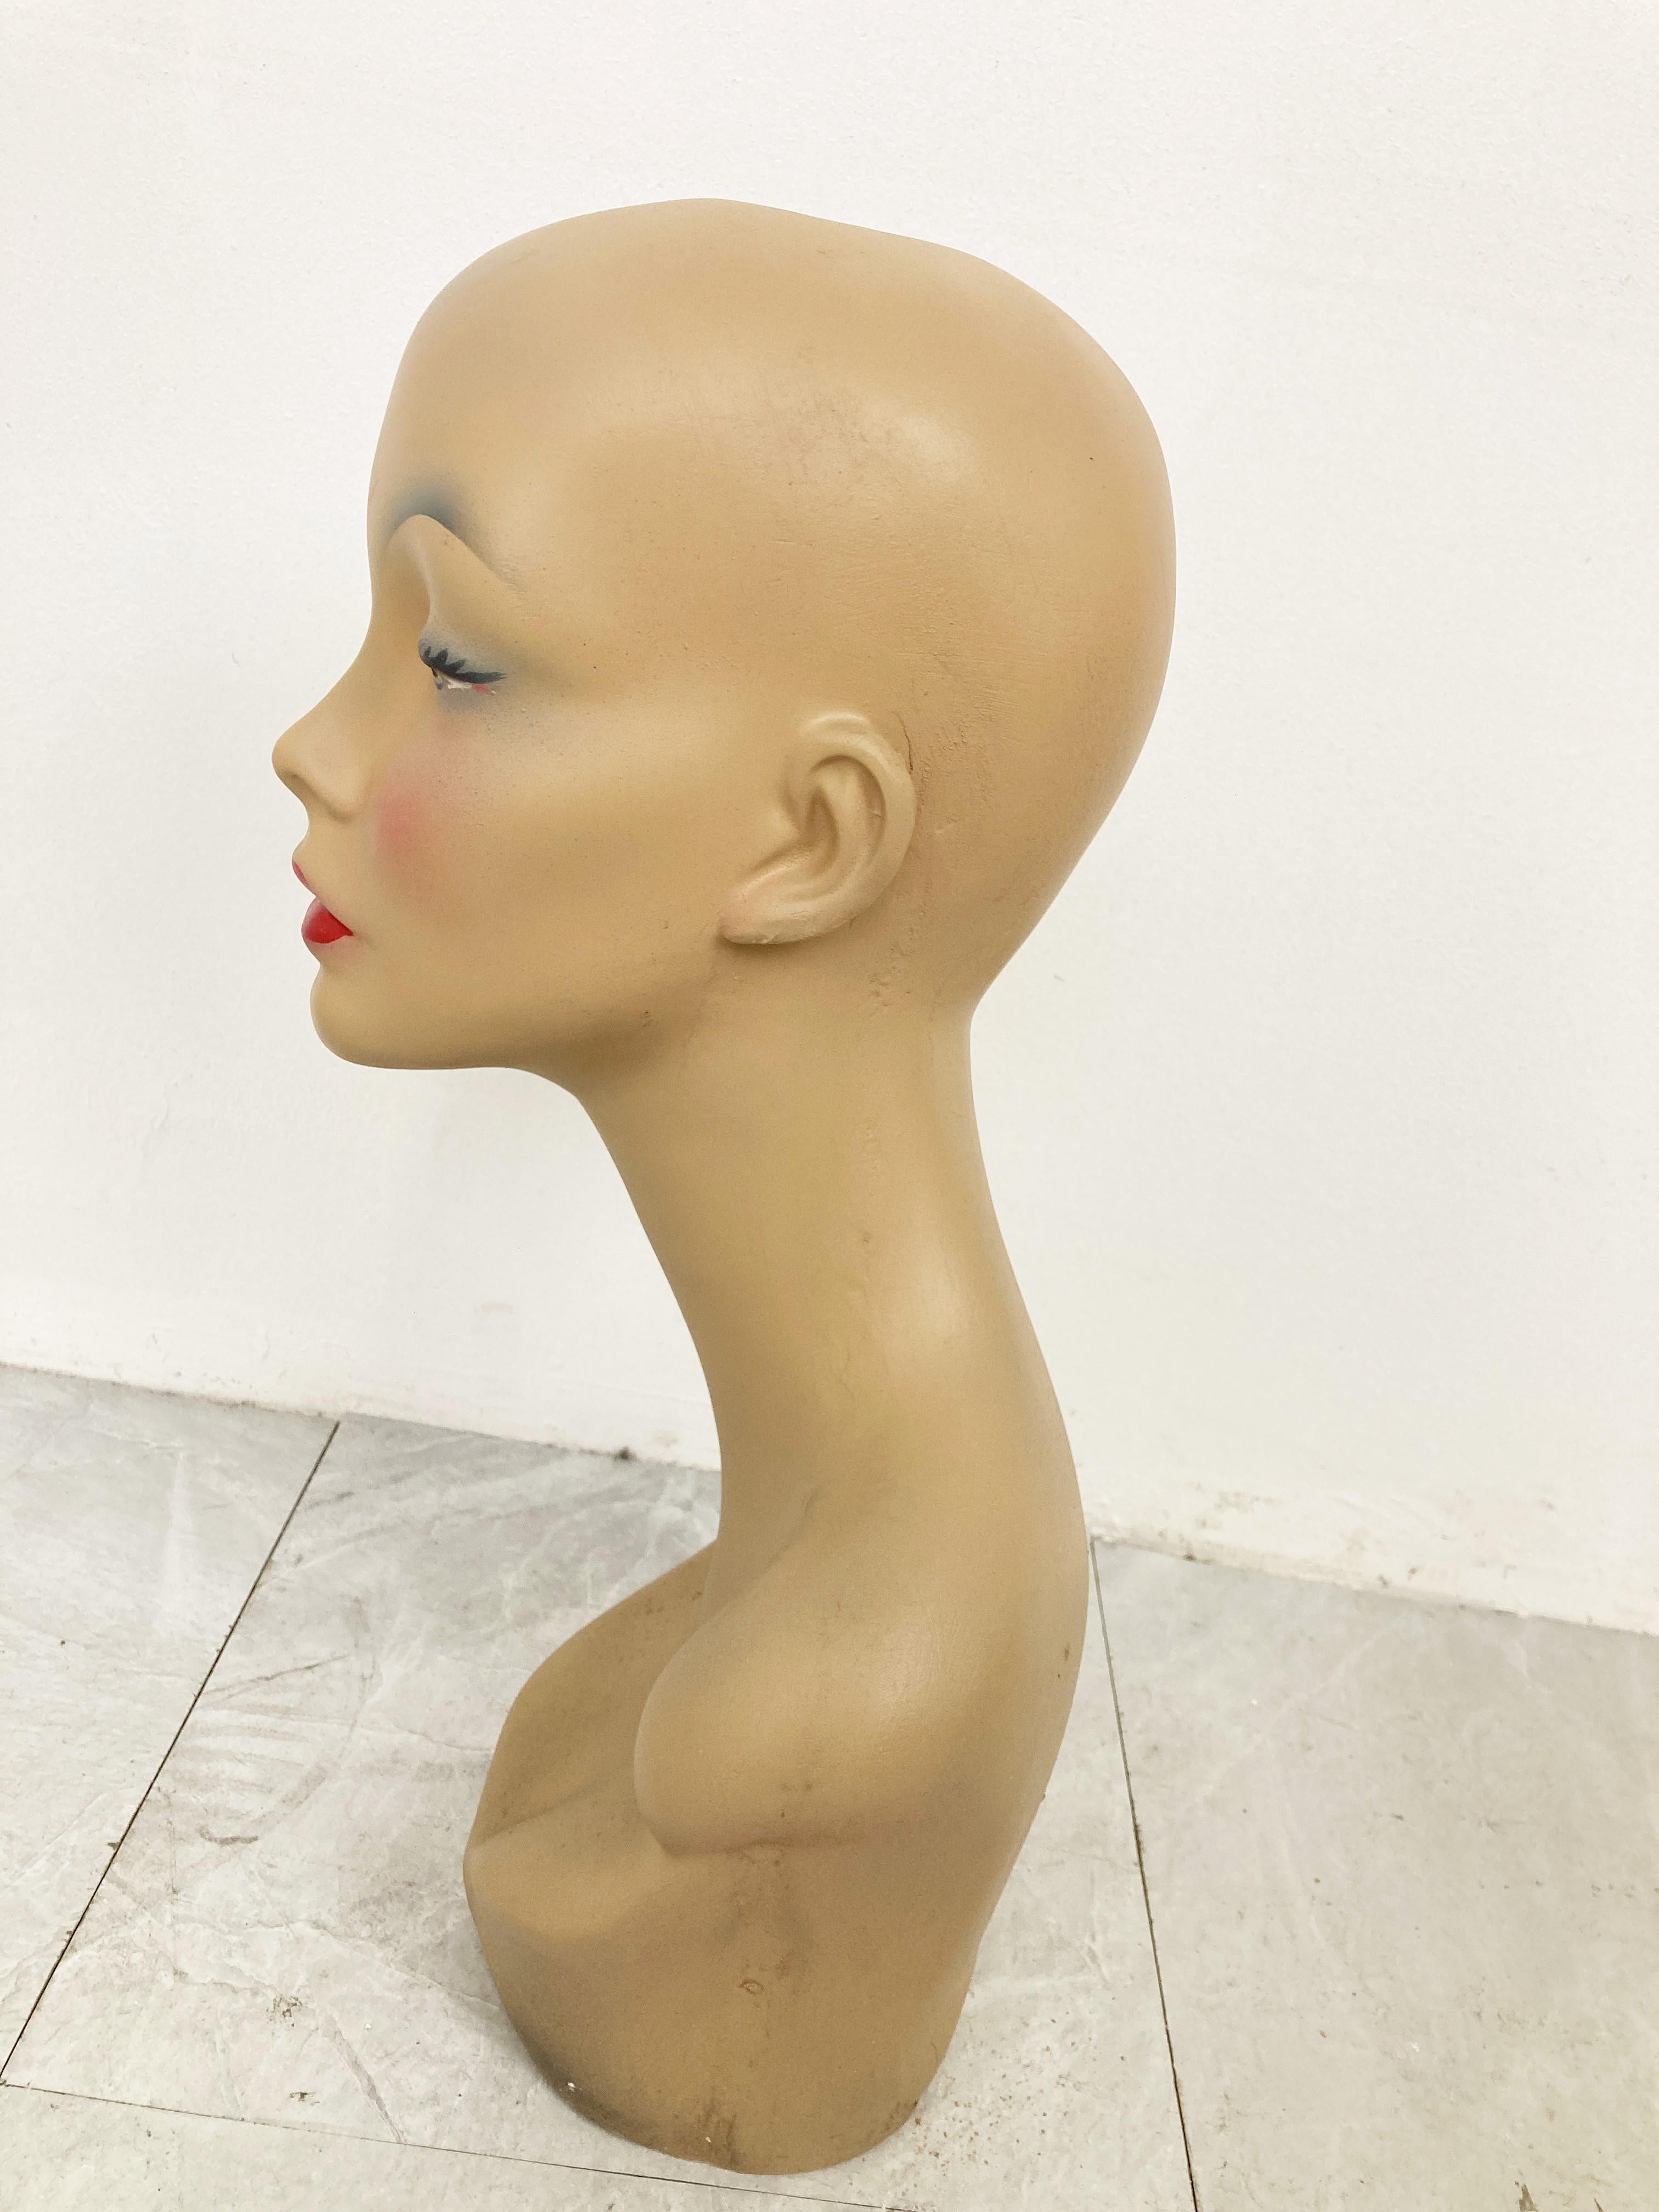 Beautiful female mannequin hat stand made from plaster.

It was used to be displayed at a shopcounter or vitrine.

Comes from a lot acquired from a clothes shop that stopped activities.

Great decorative item to display glasses,